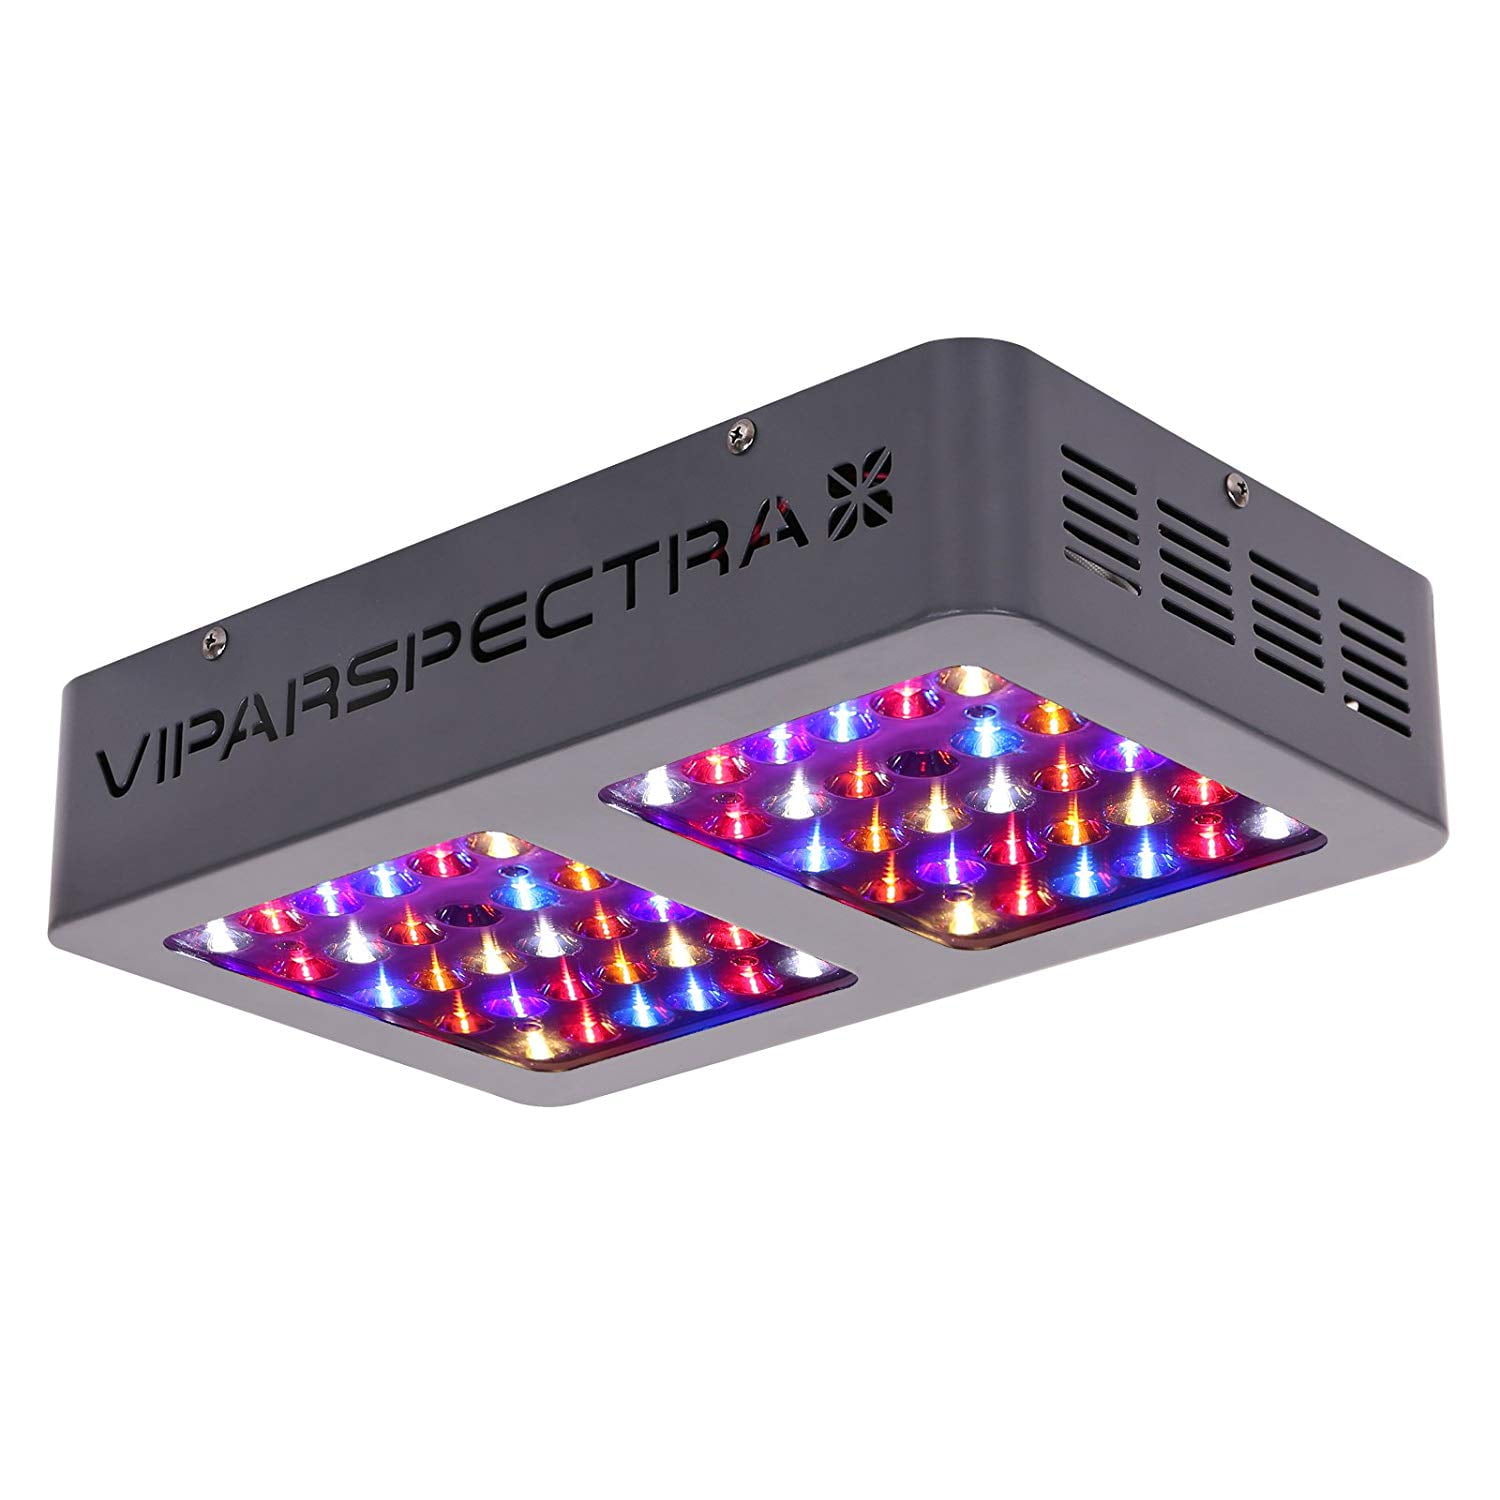 VIPARSPECTRA UL Certified Reflector-Series R900 900W LED Grow Light Full Spectrum for Indoor Plants Veg and Flower